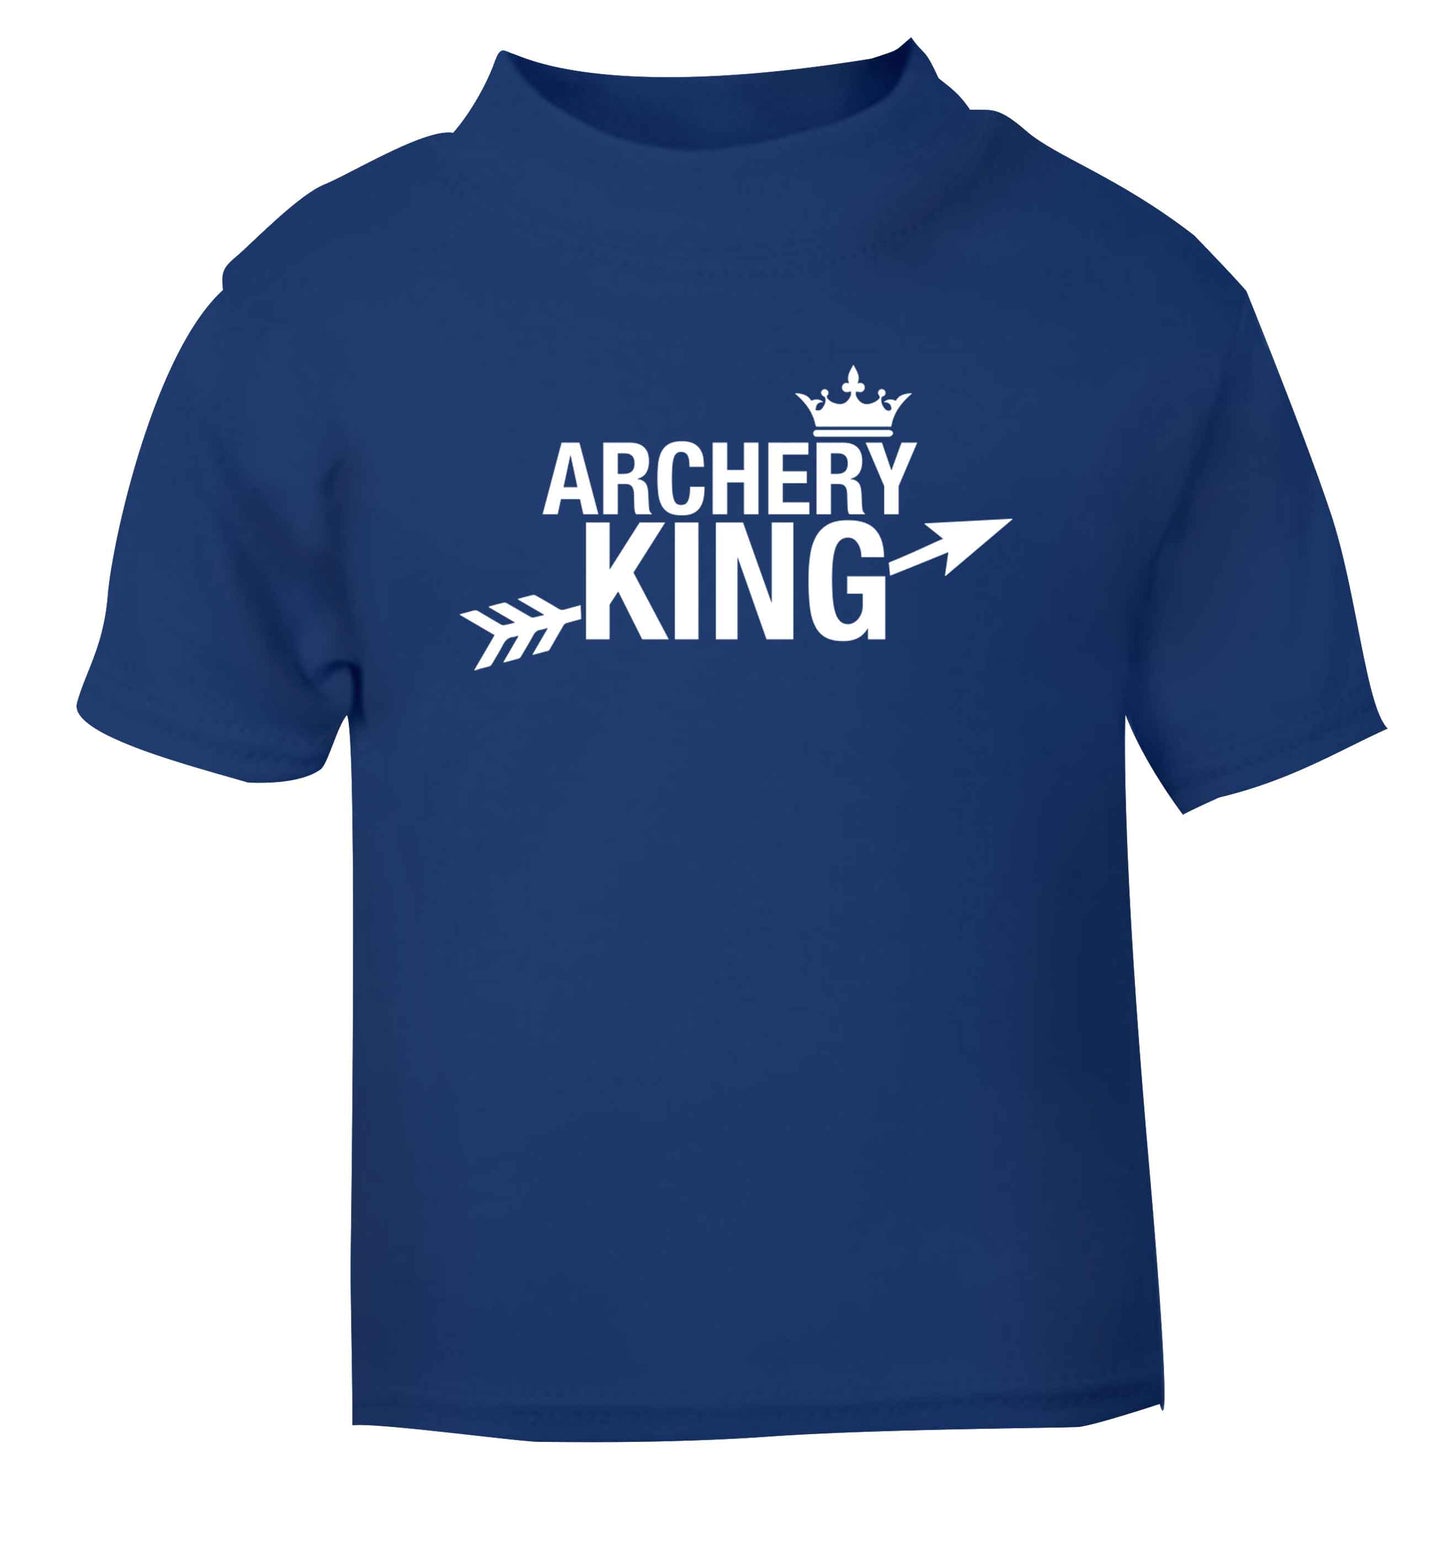 Archery king blue Baby Toddler Tshirt 2 Years